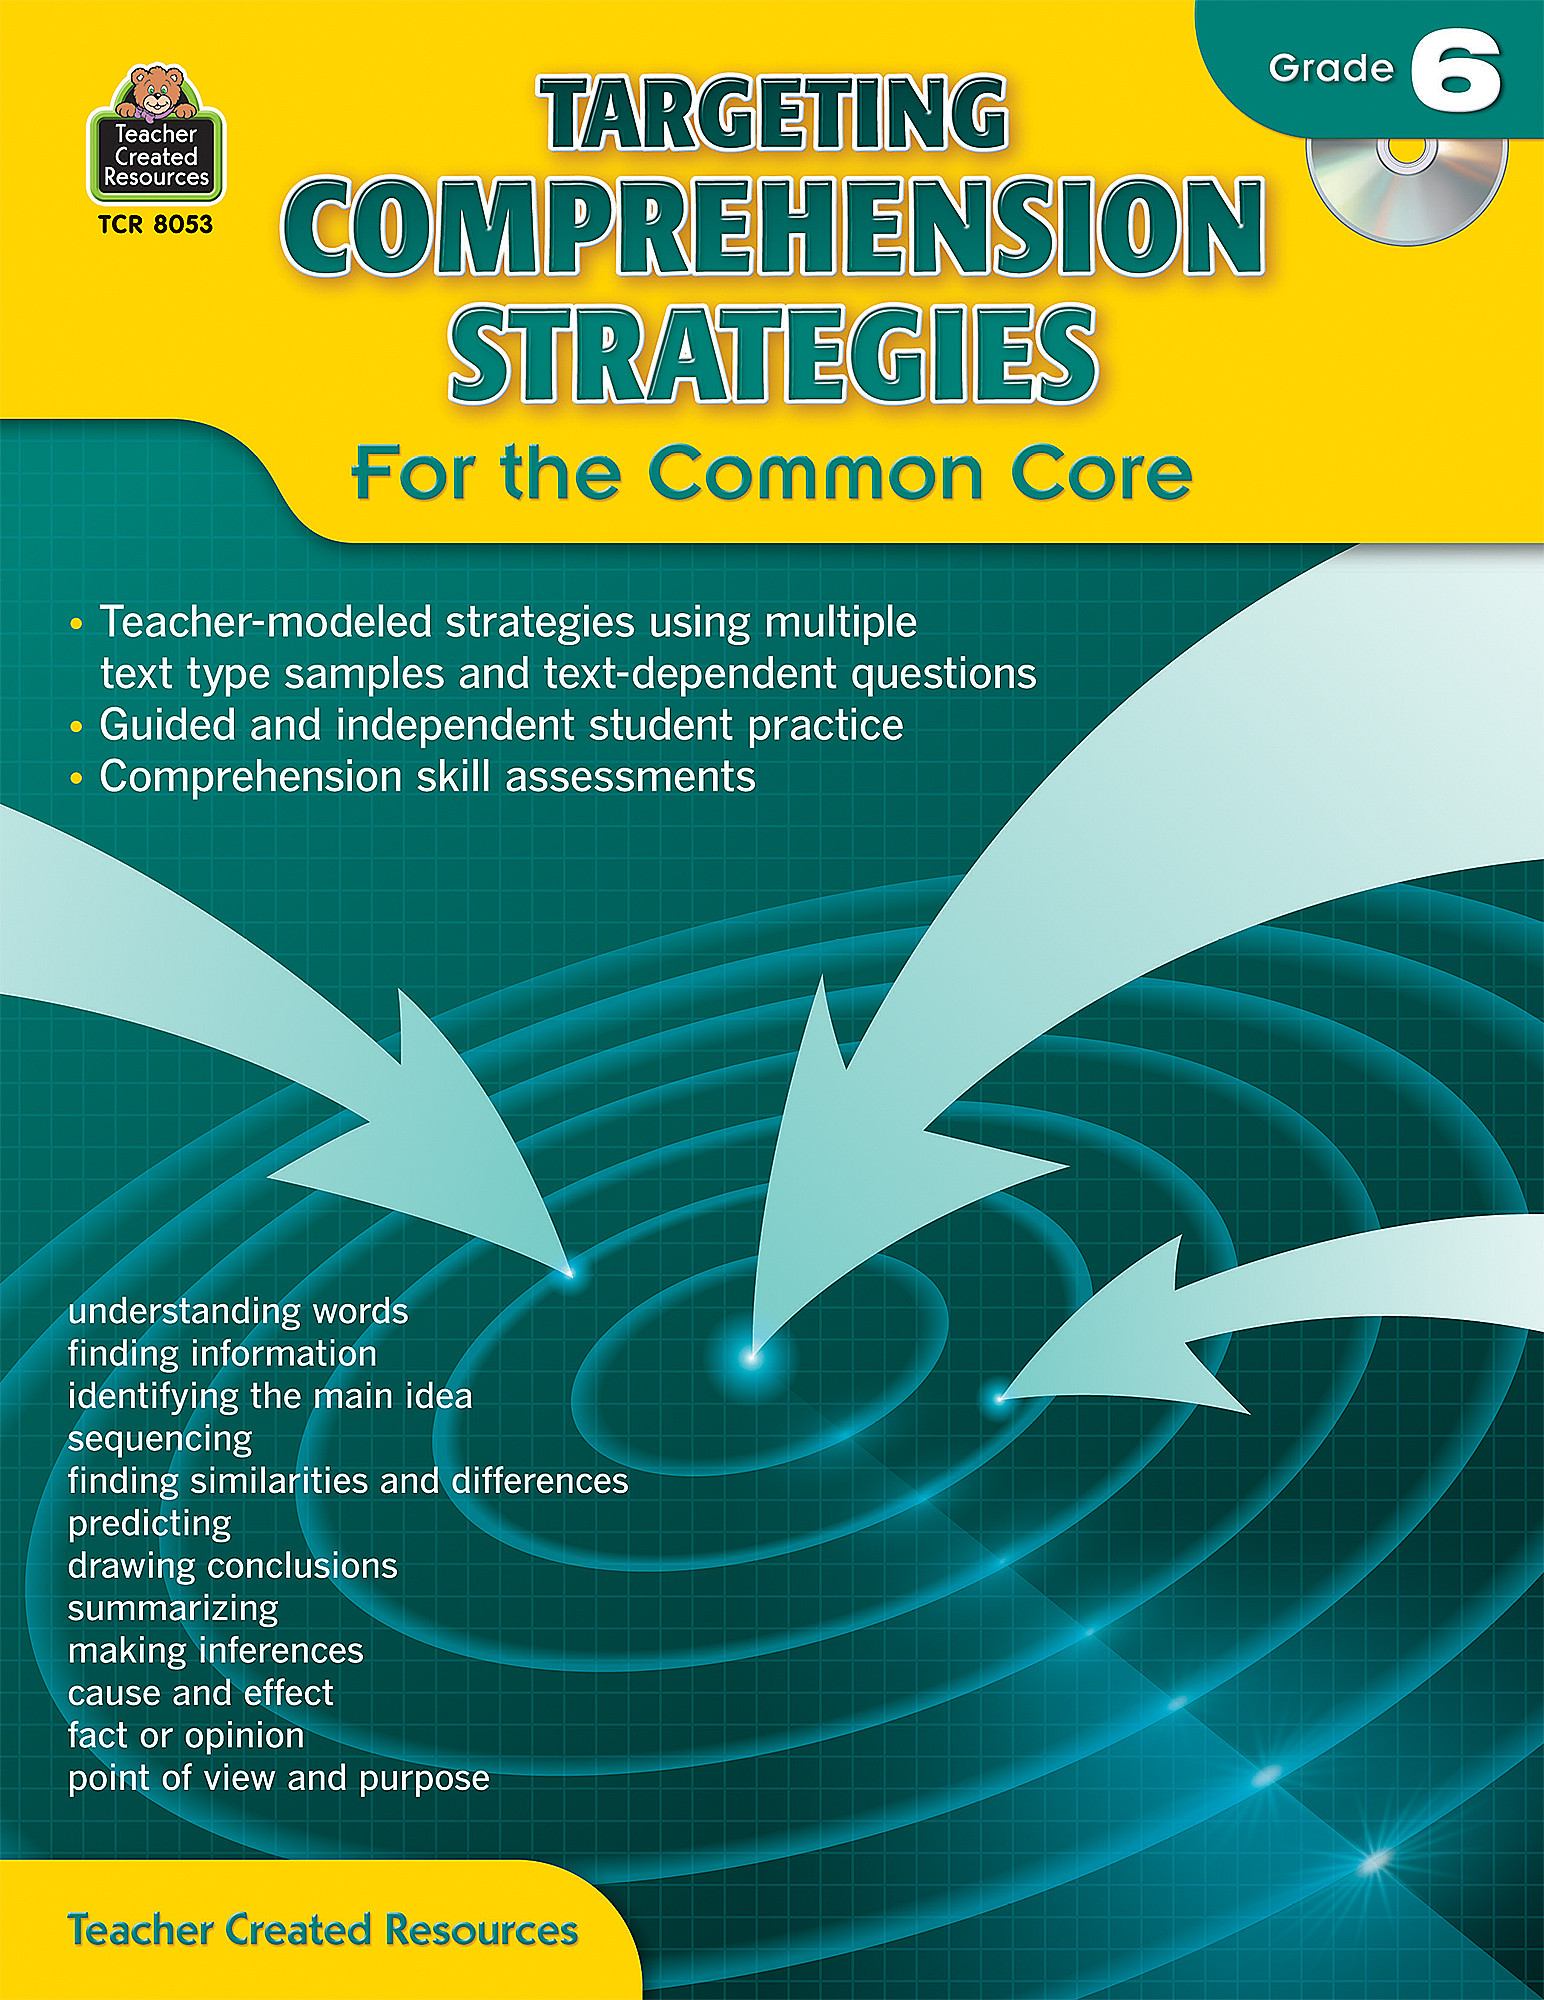 targeting-comprehension-strategies-for-the-common-core-grade-6-tcr8053-teacher-created-resources